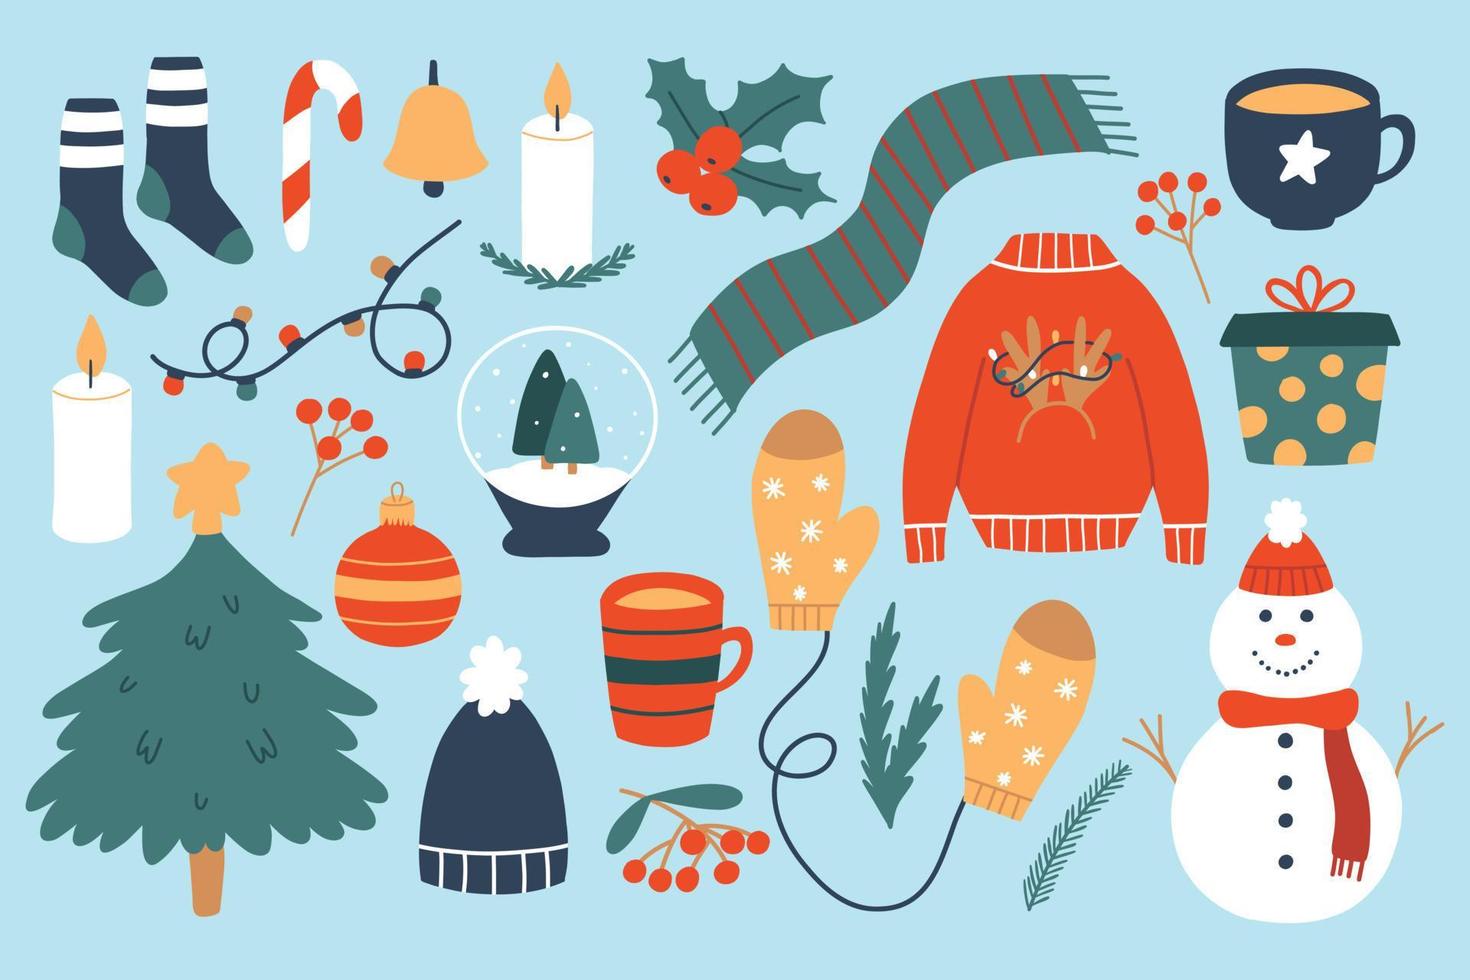 Set of winter elements. Collection of Christmas objects. Vector illustration. Flat style.Sweater,socks,holly,Christmas toy.